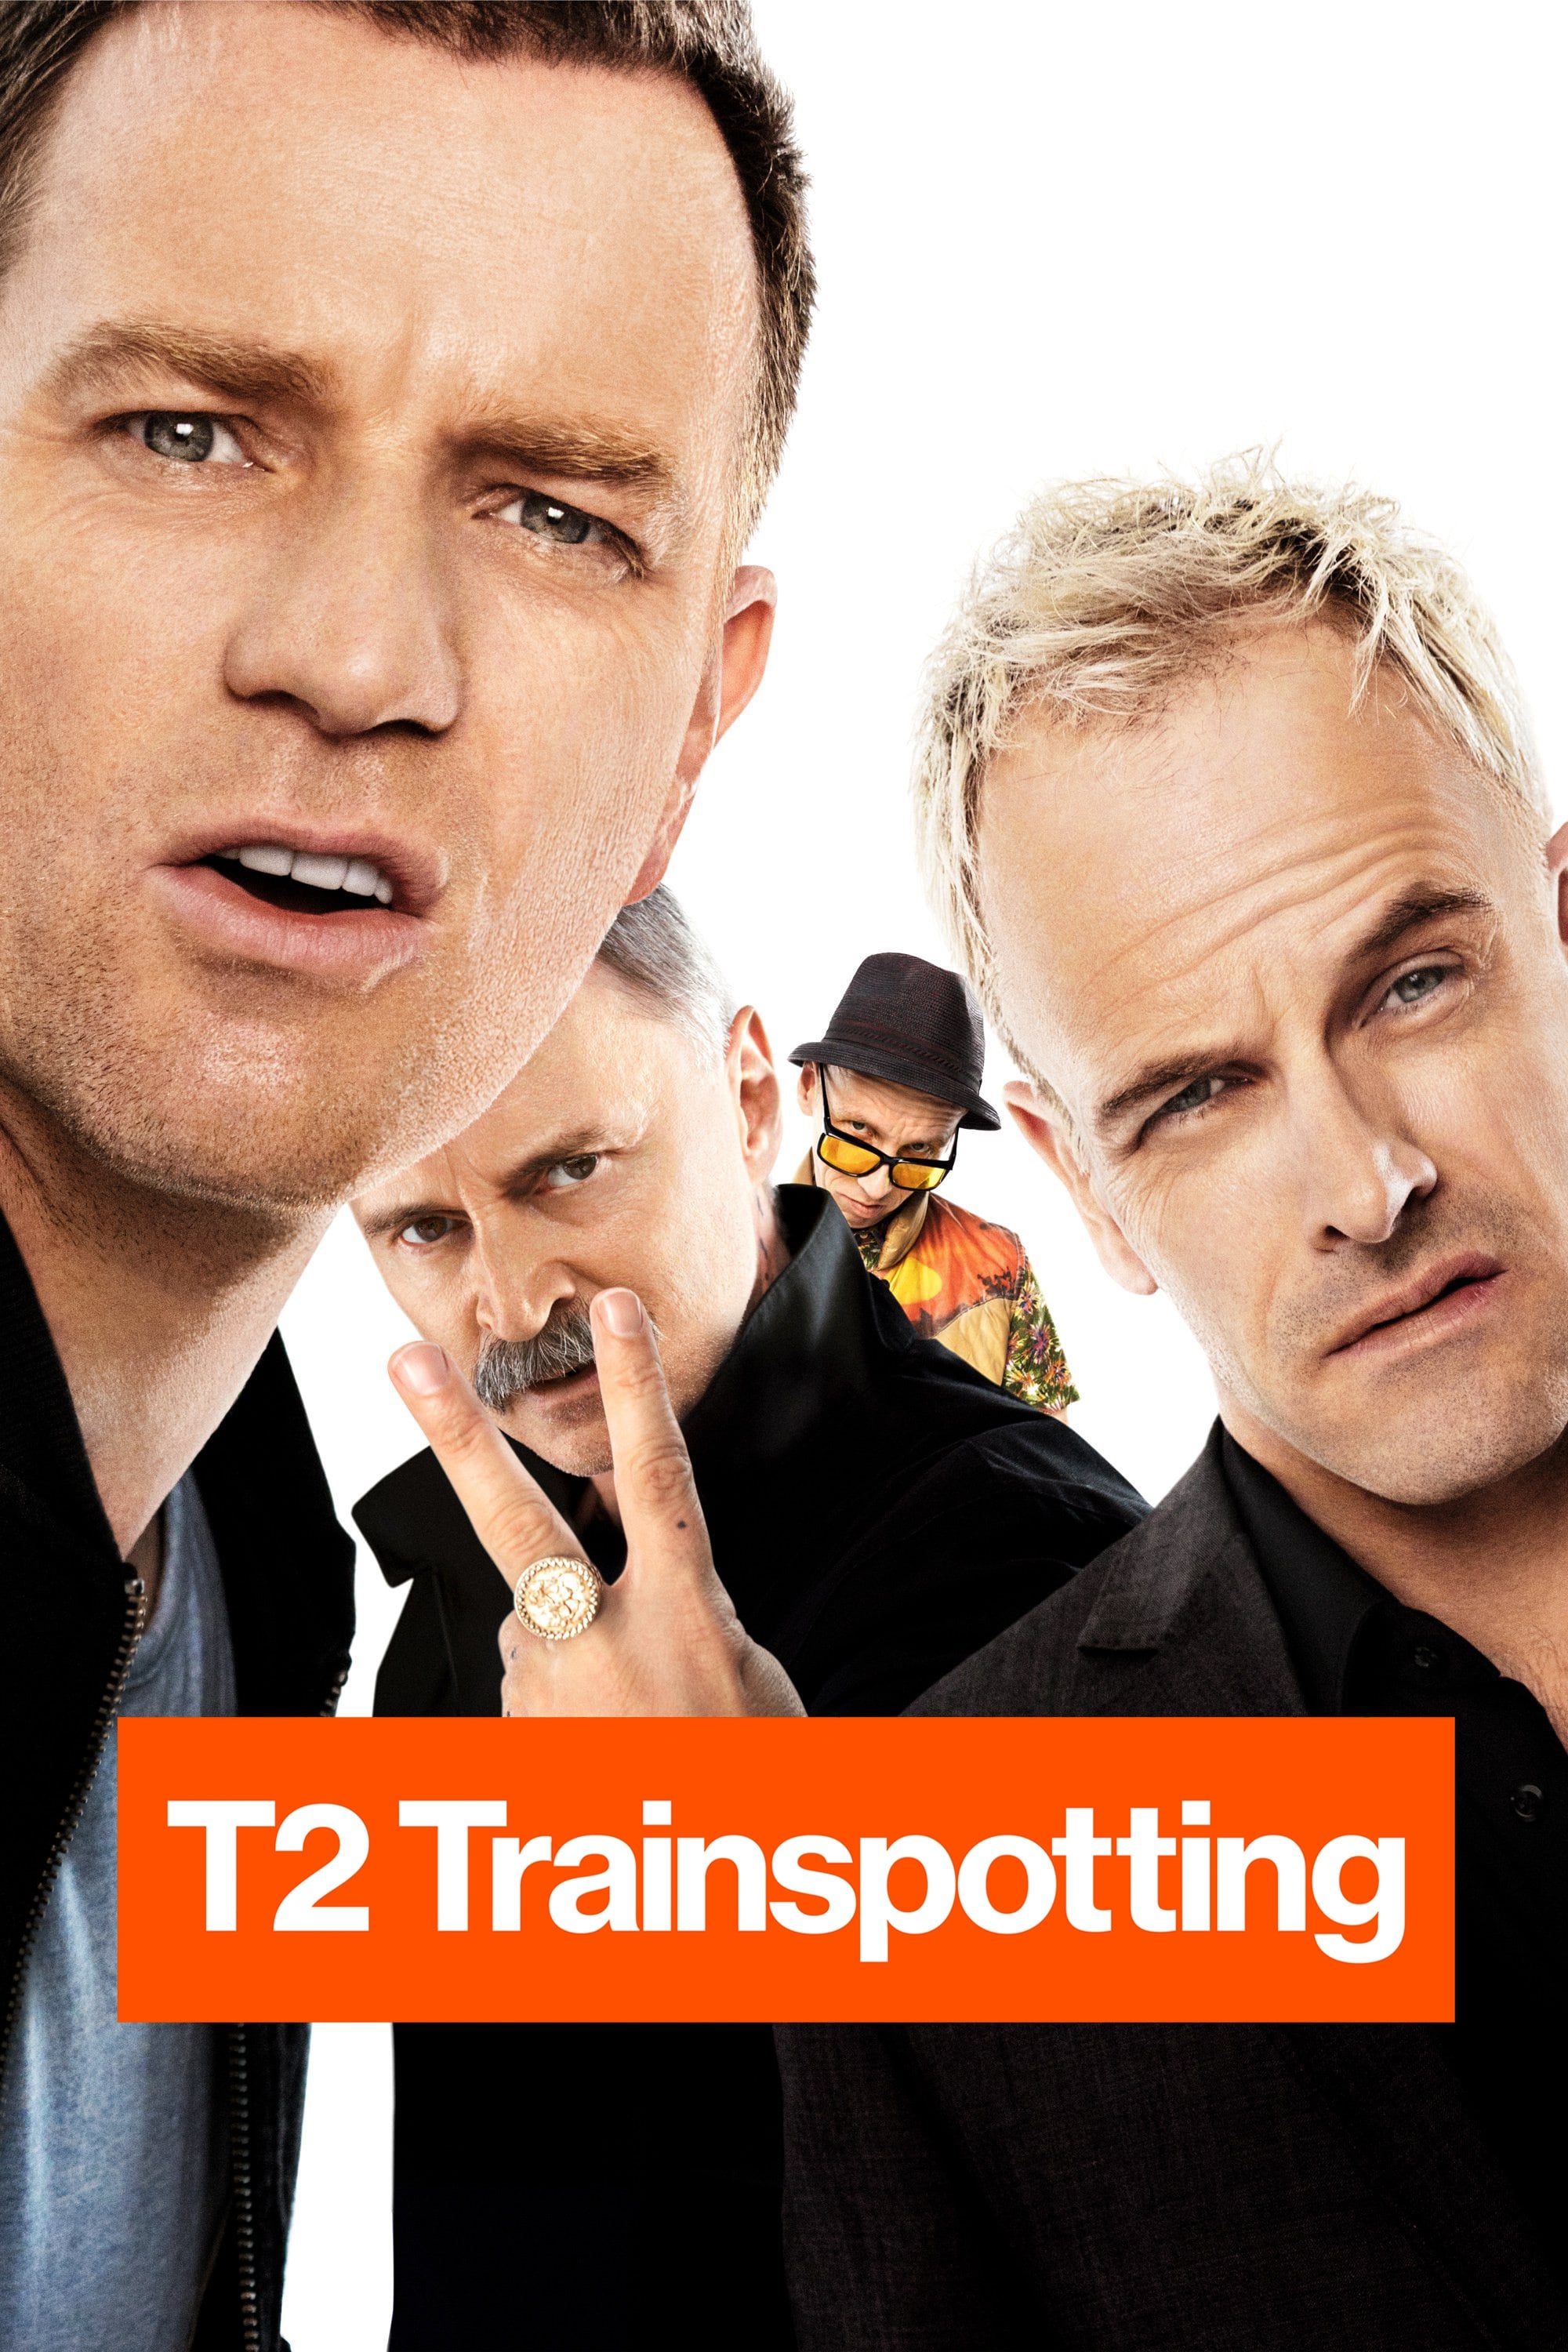 T2 Trainspotting Movie poster